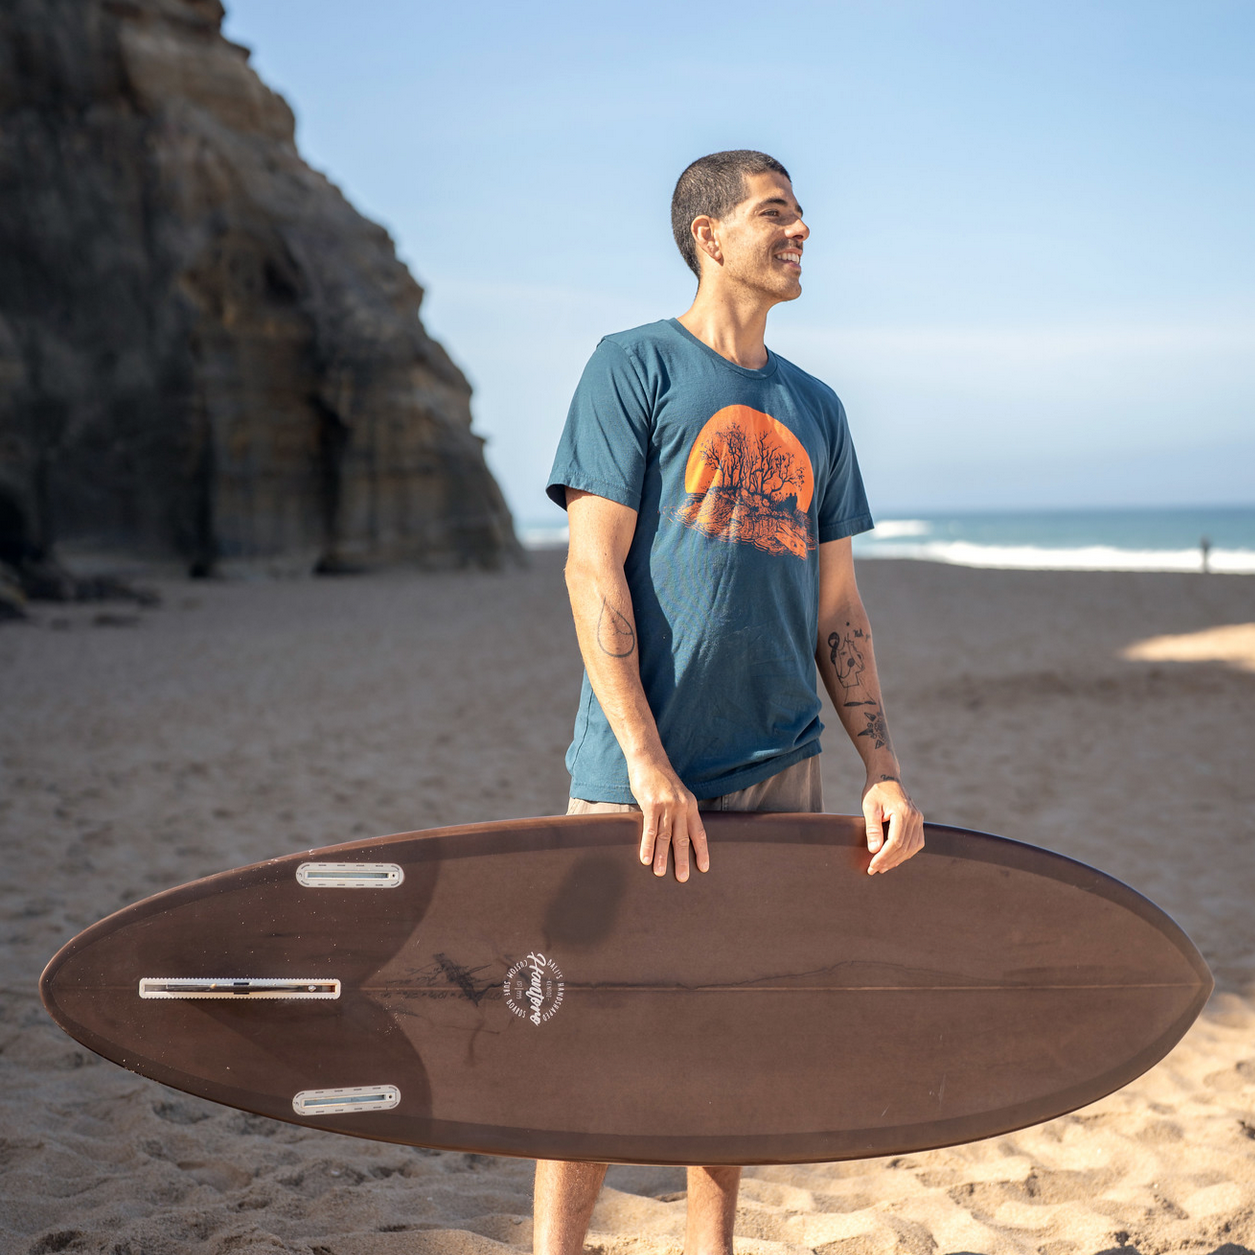 Man on beach holding surf board while wearing a kayaker t-shirt